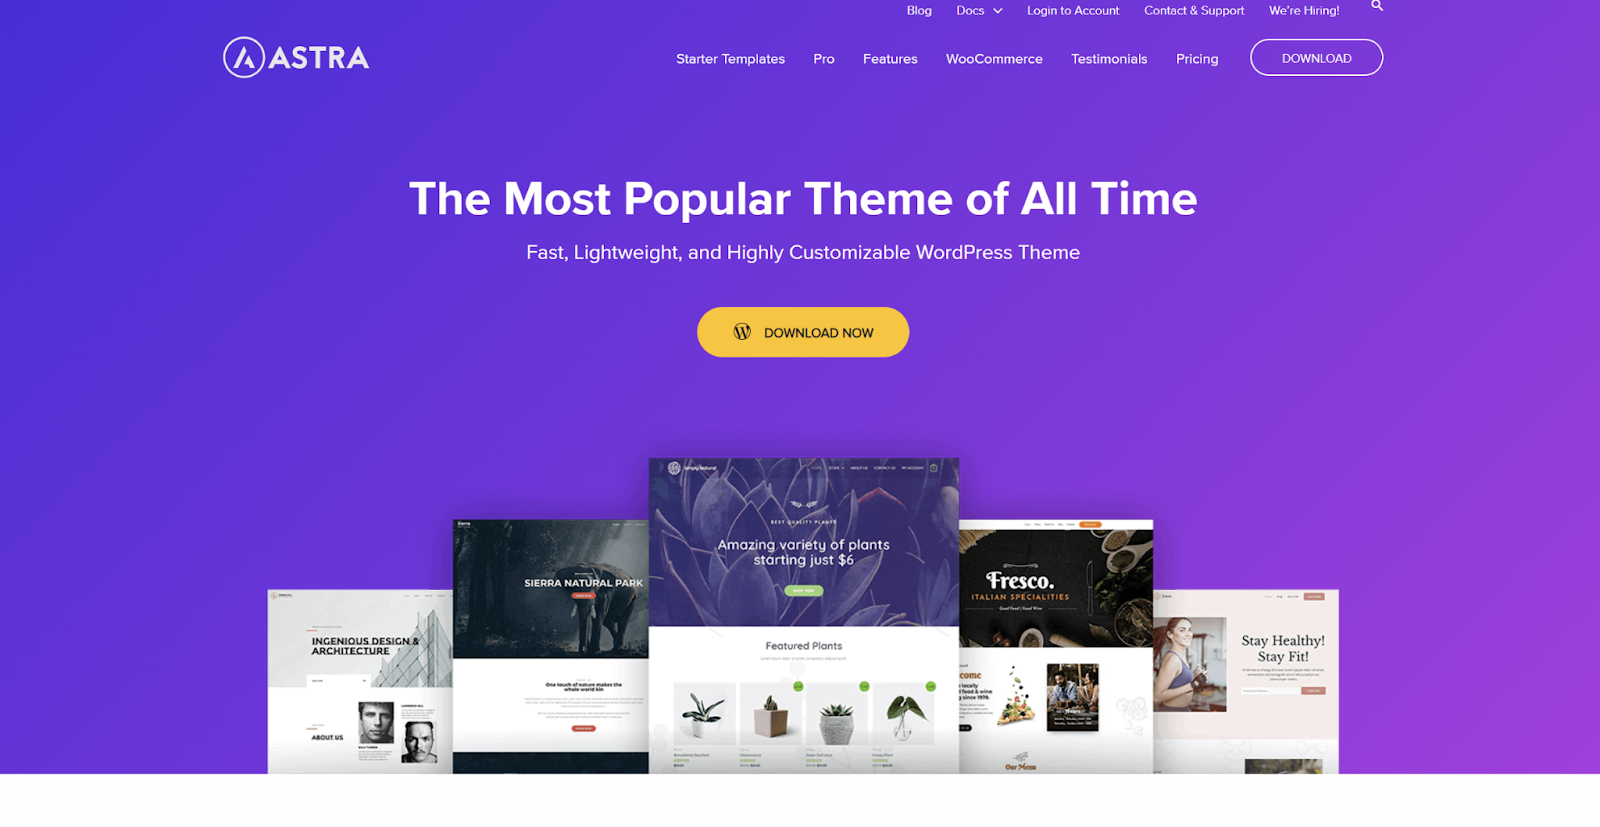 WordPress Themes 101 Free vs Premium and Everything in Between